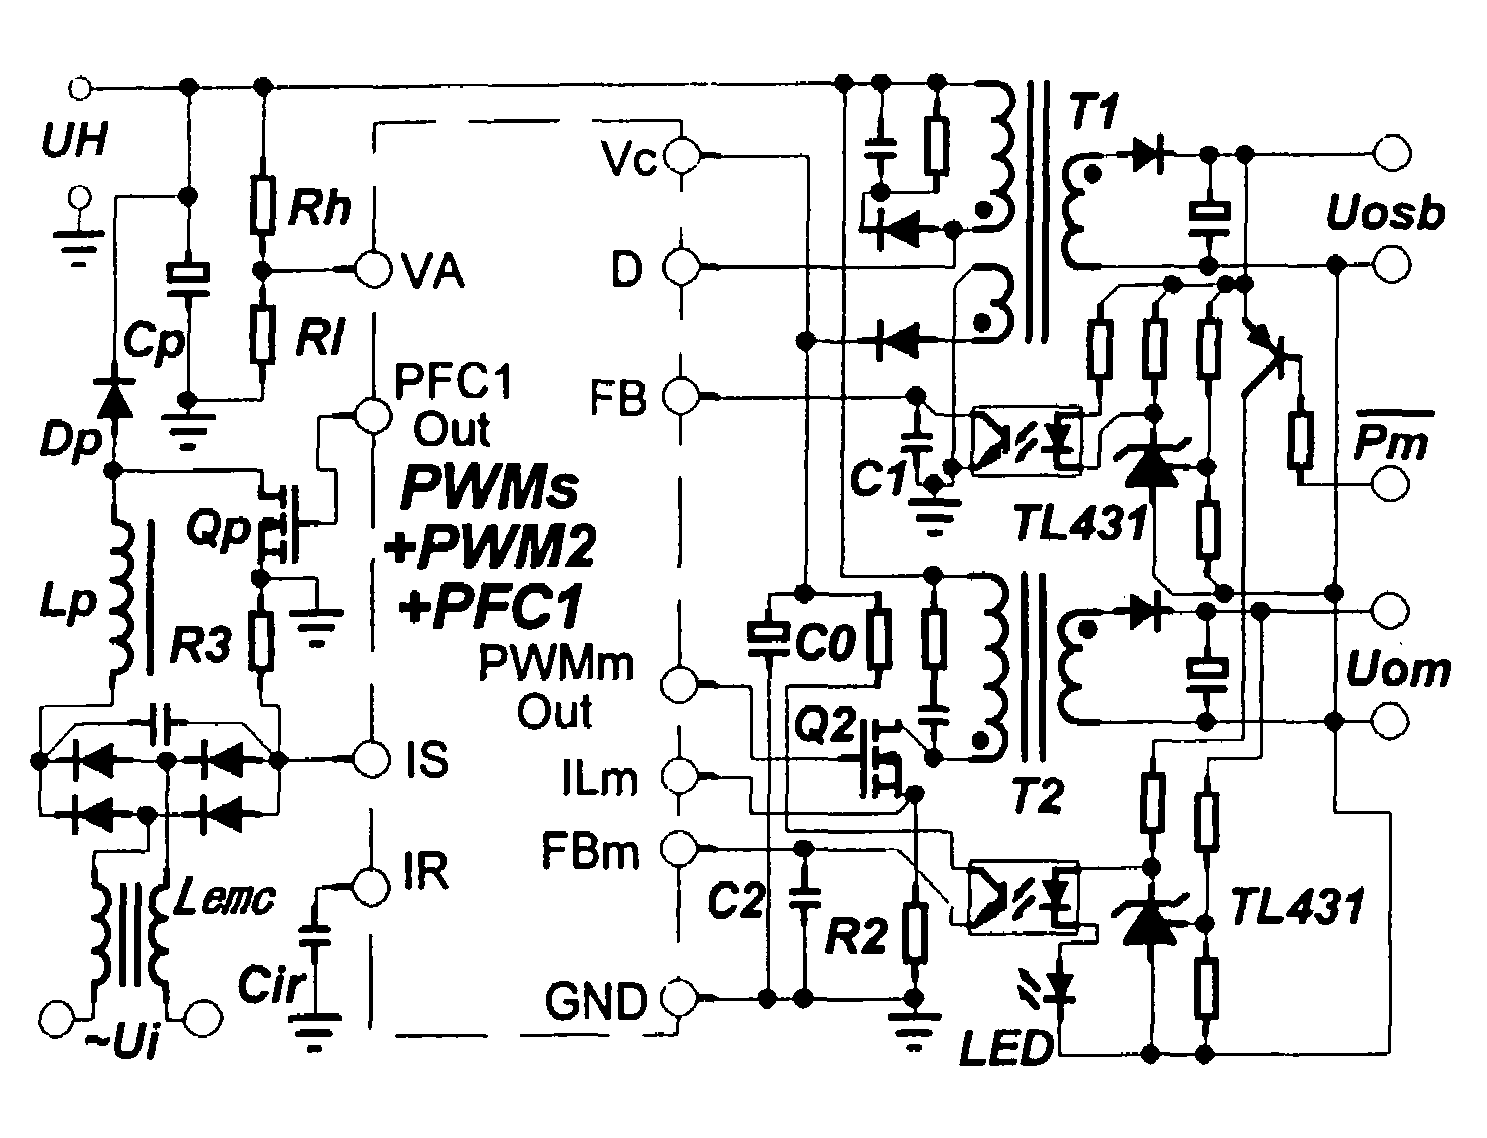 Green switch power supply with standby function and its IC